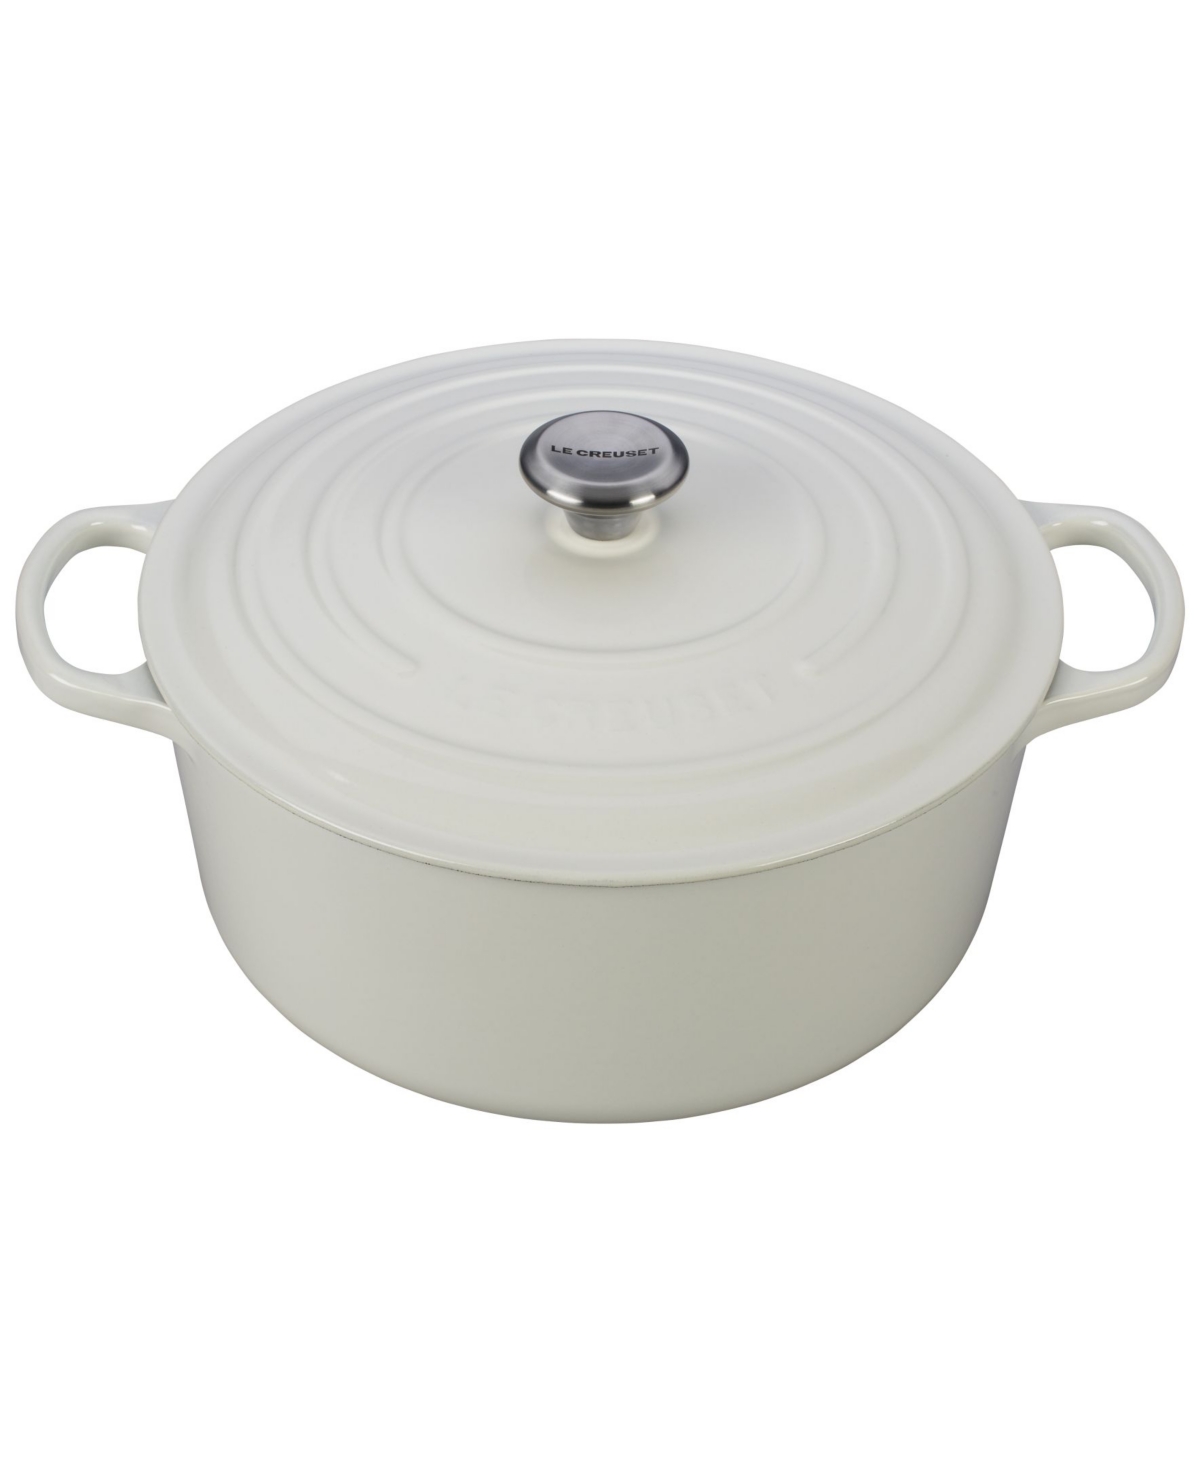 Le Creuset Signature Enameled Cast Iron 9 Qt. Round French Oven In White